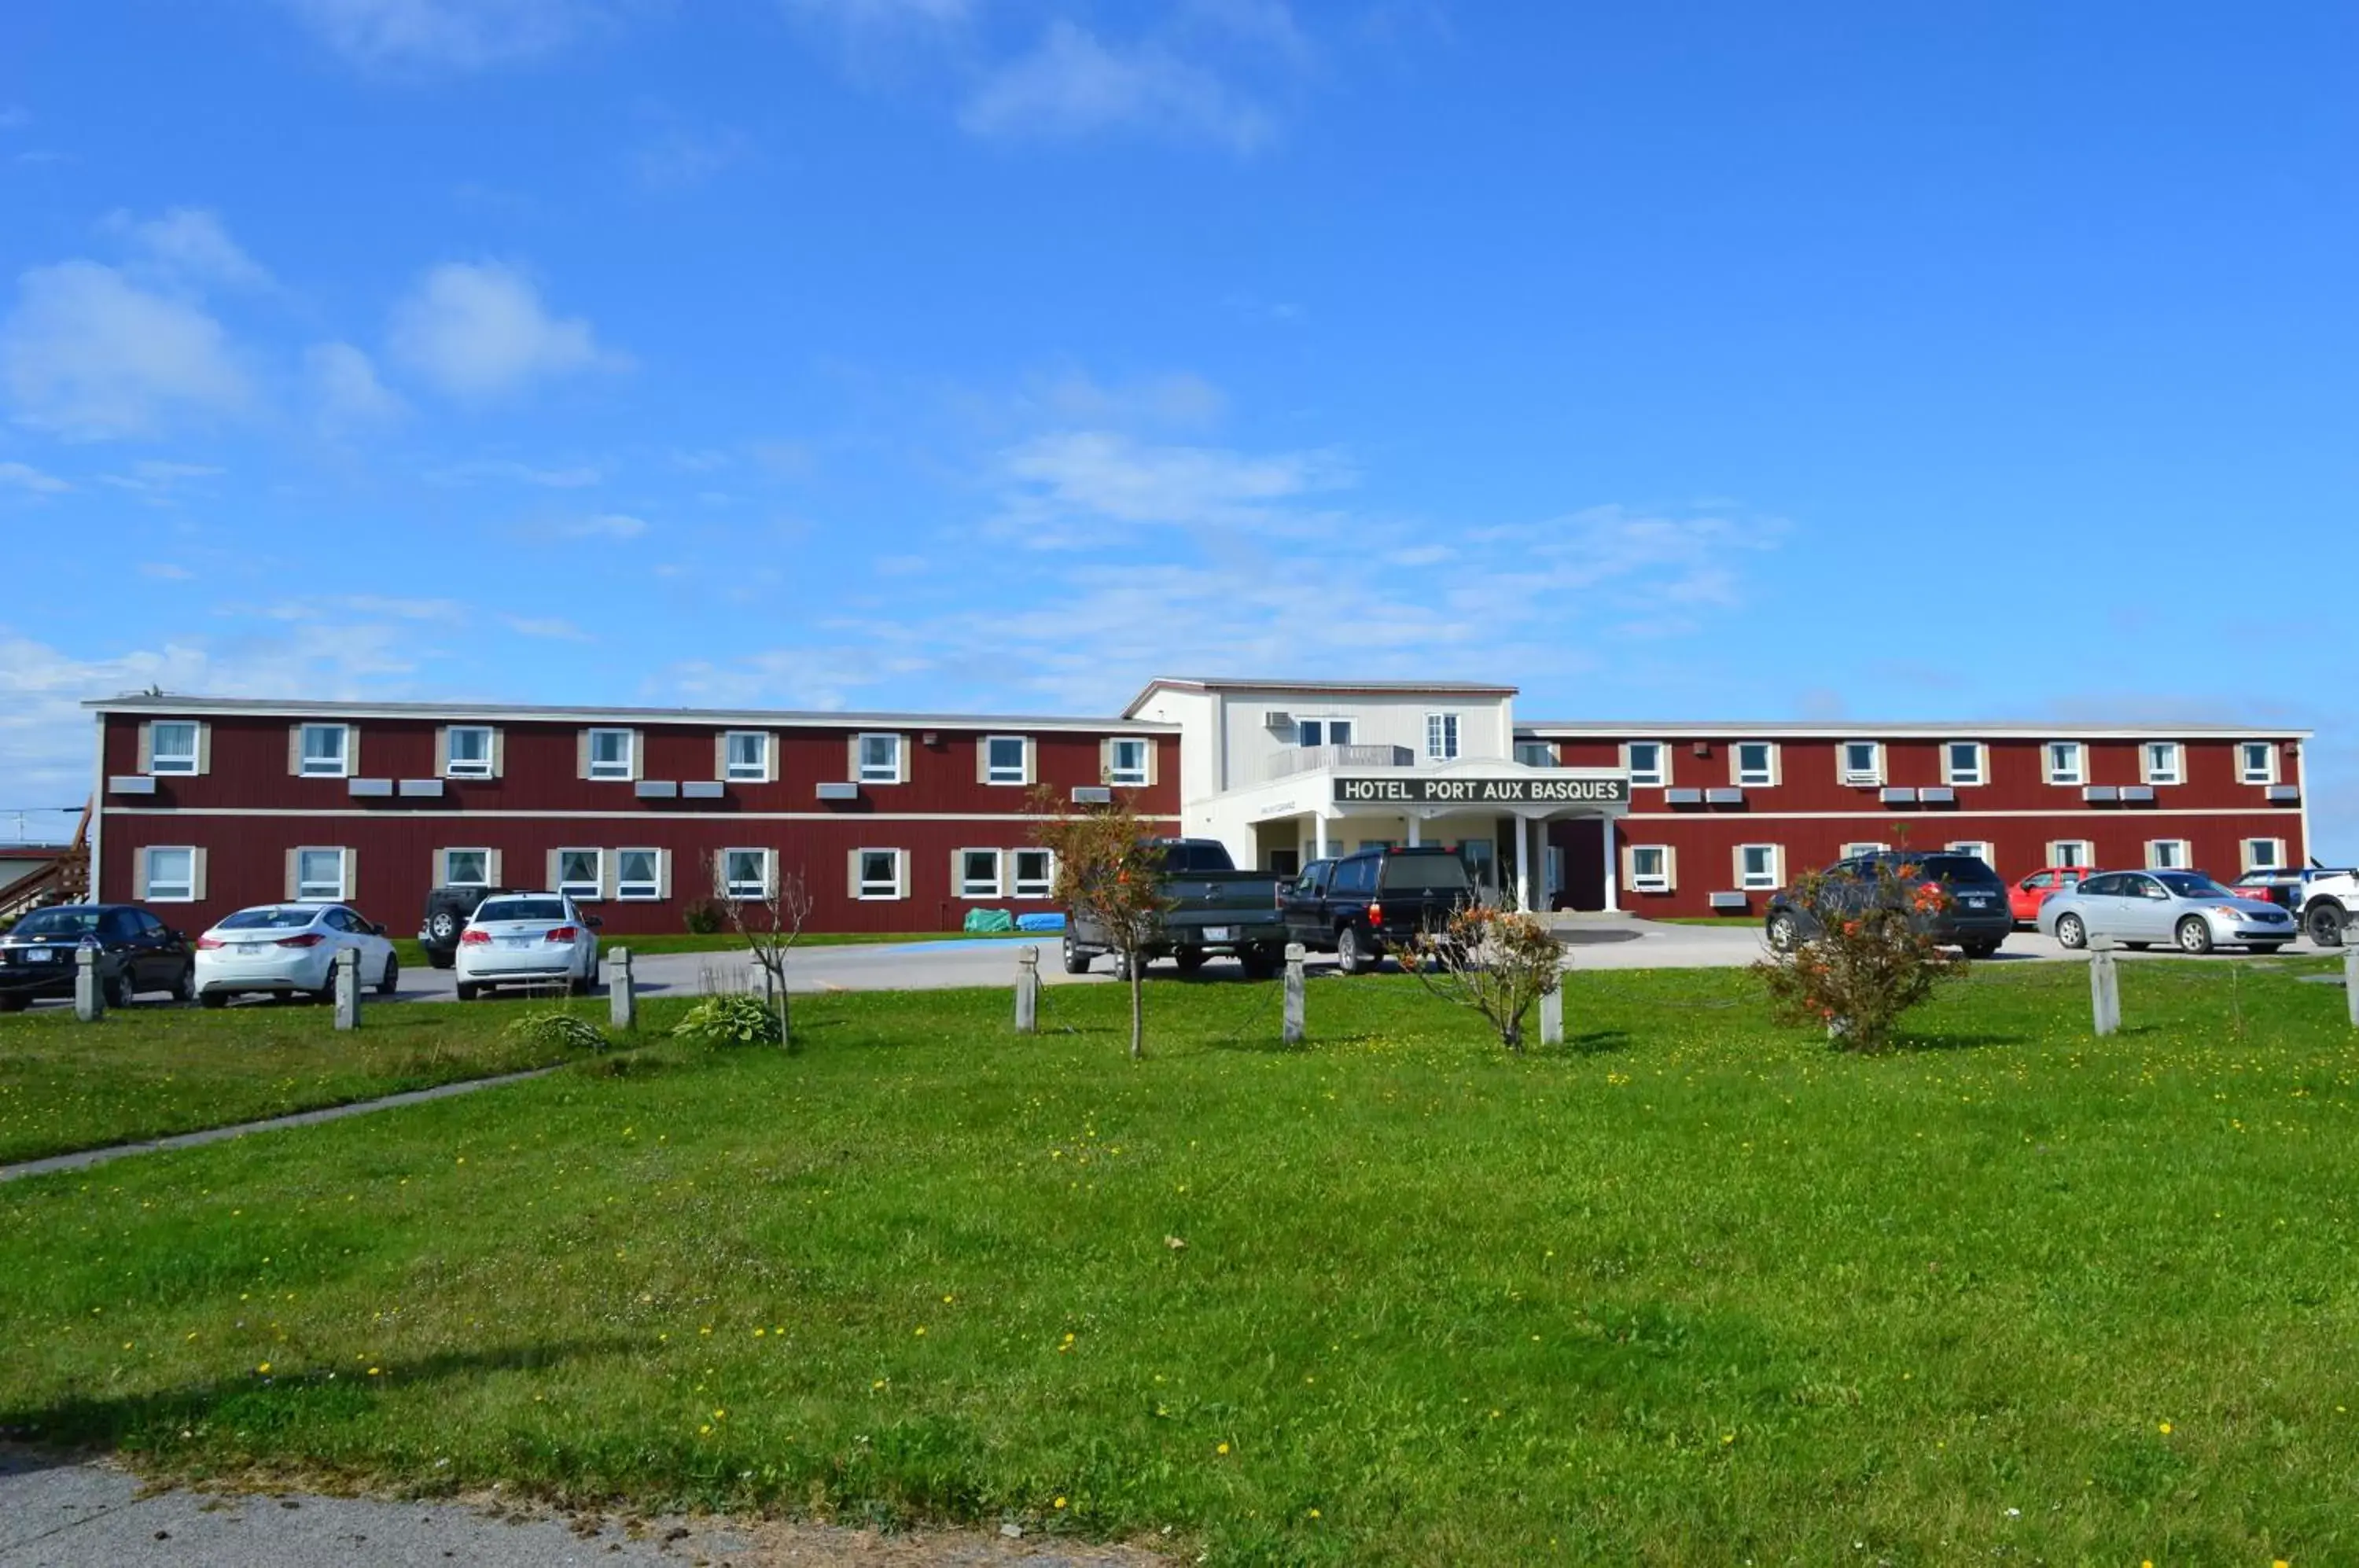 Bird's eye view, Property Building in Hotel Port Aux Basques